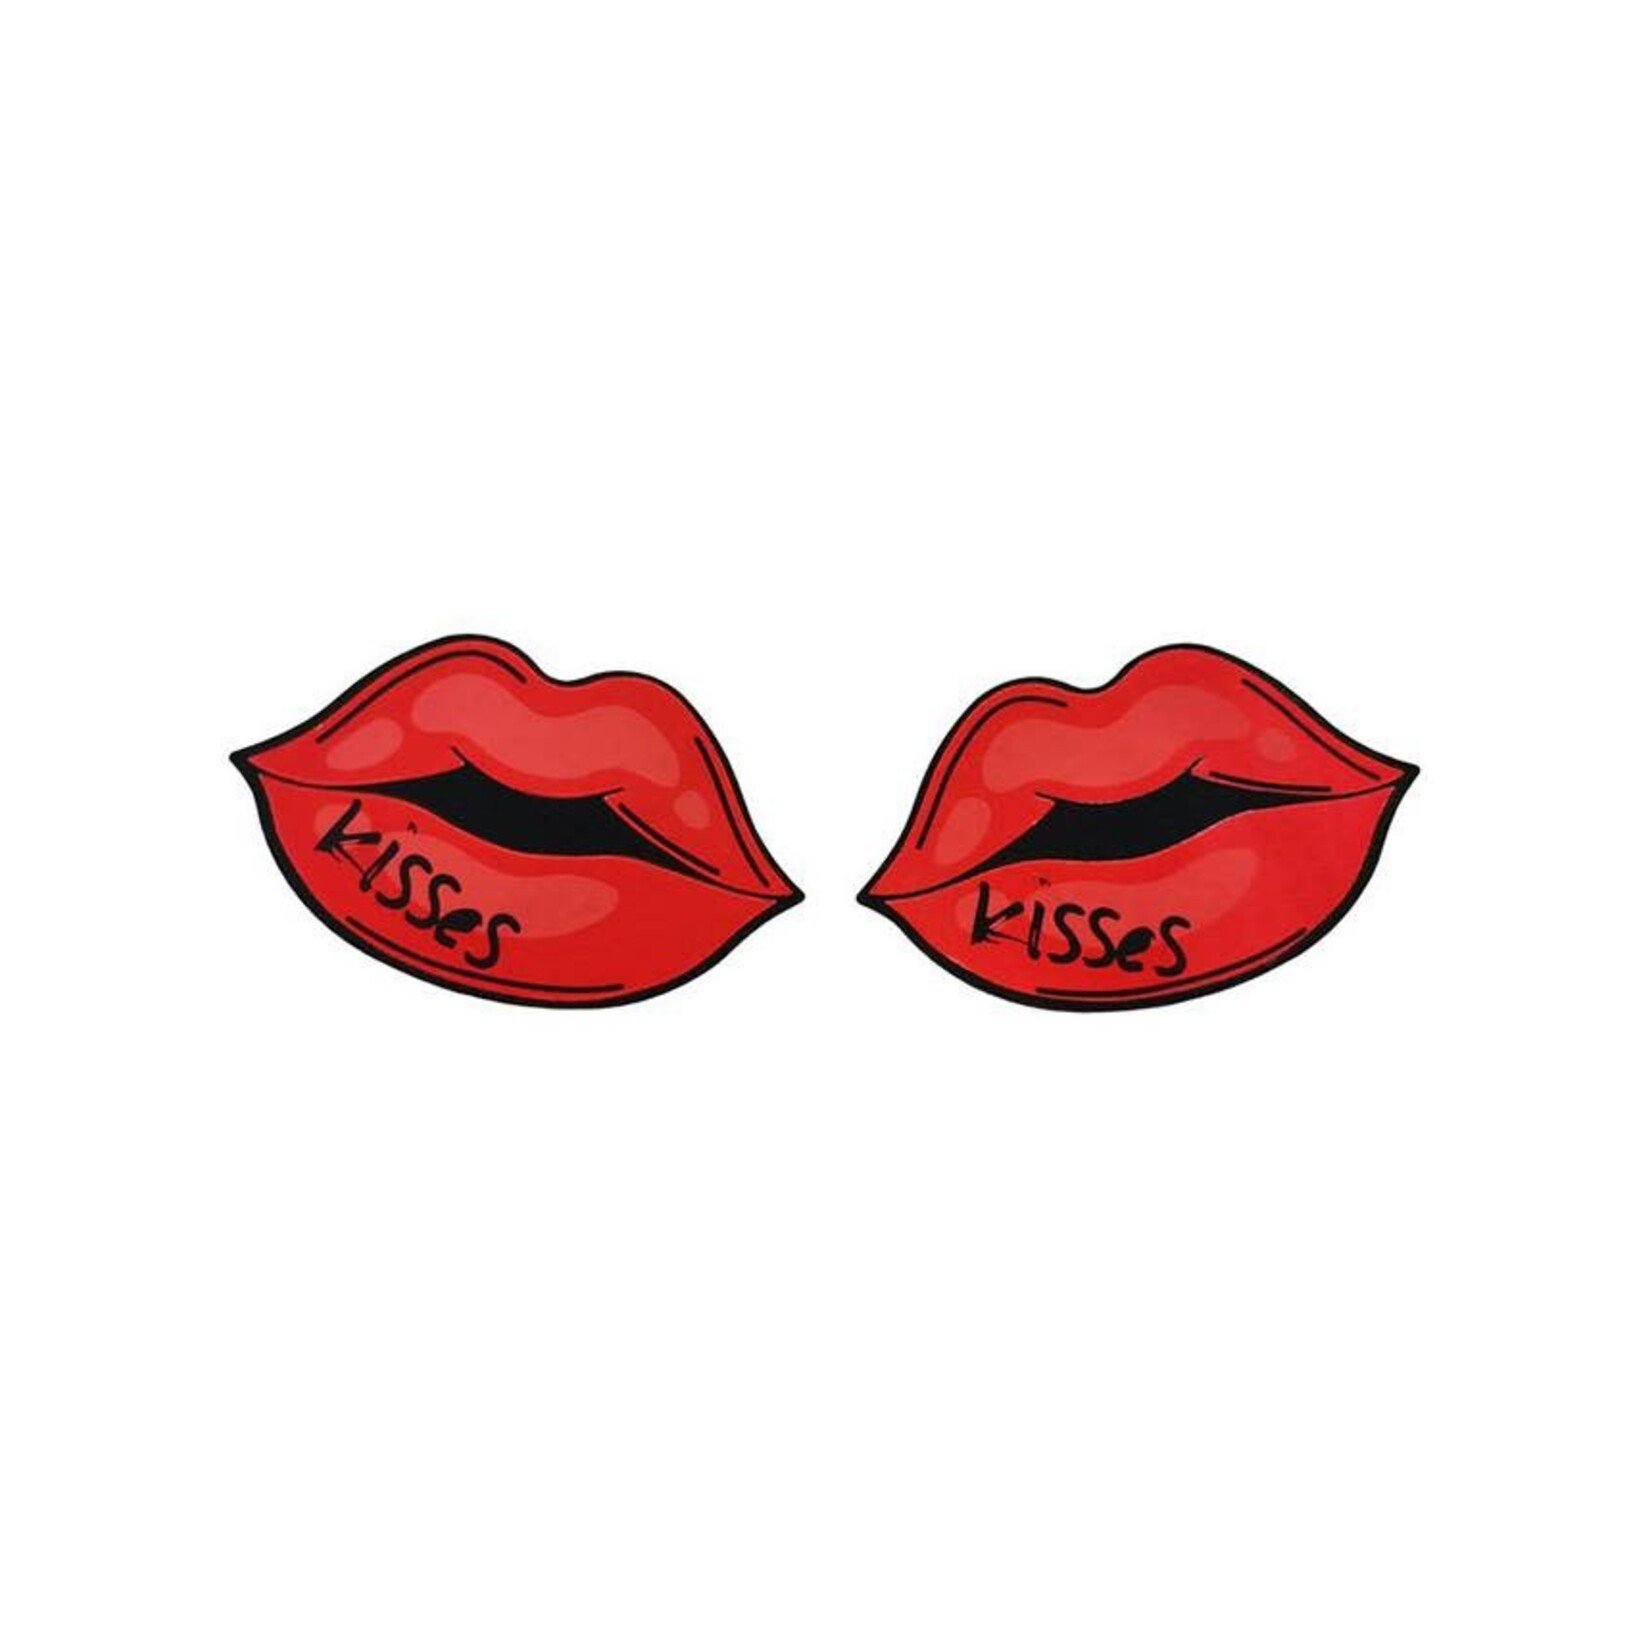 OH YEAH! -  SEXY RED LIPS NIPPLE COVER ONE SIZE